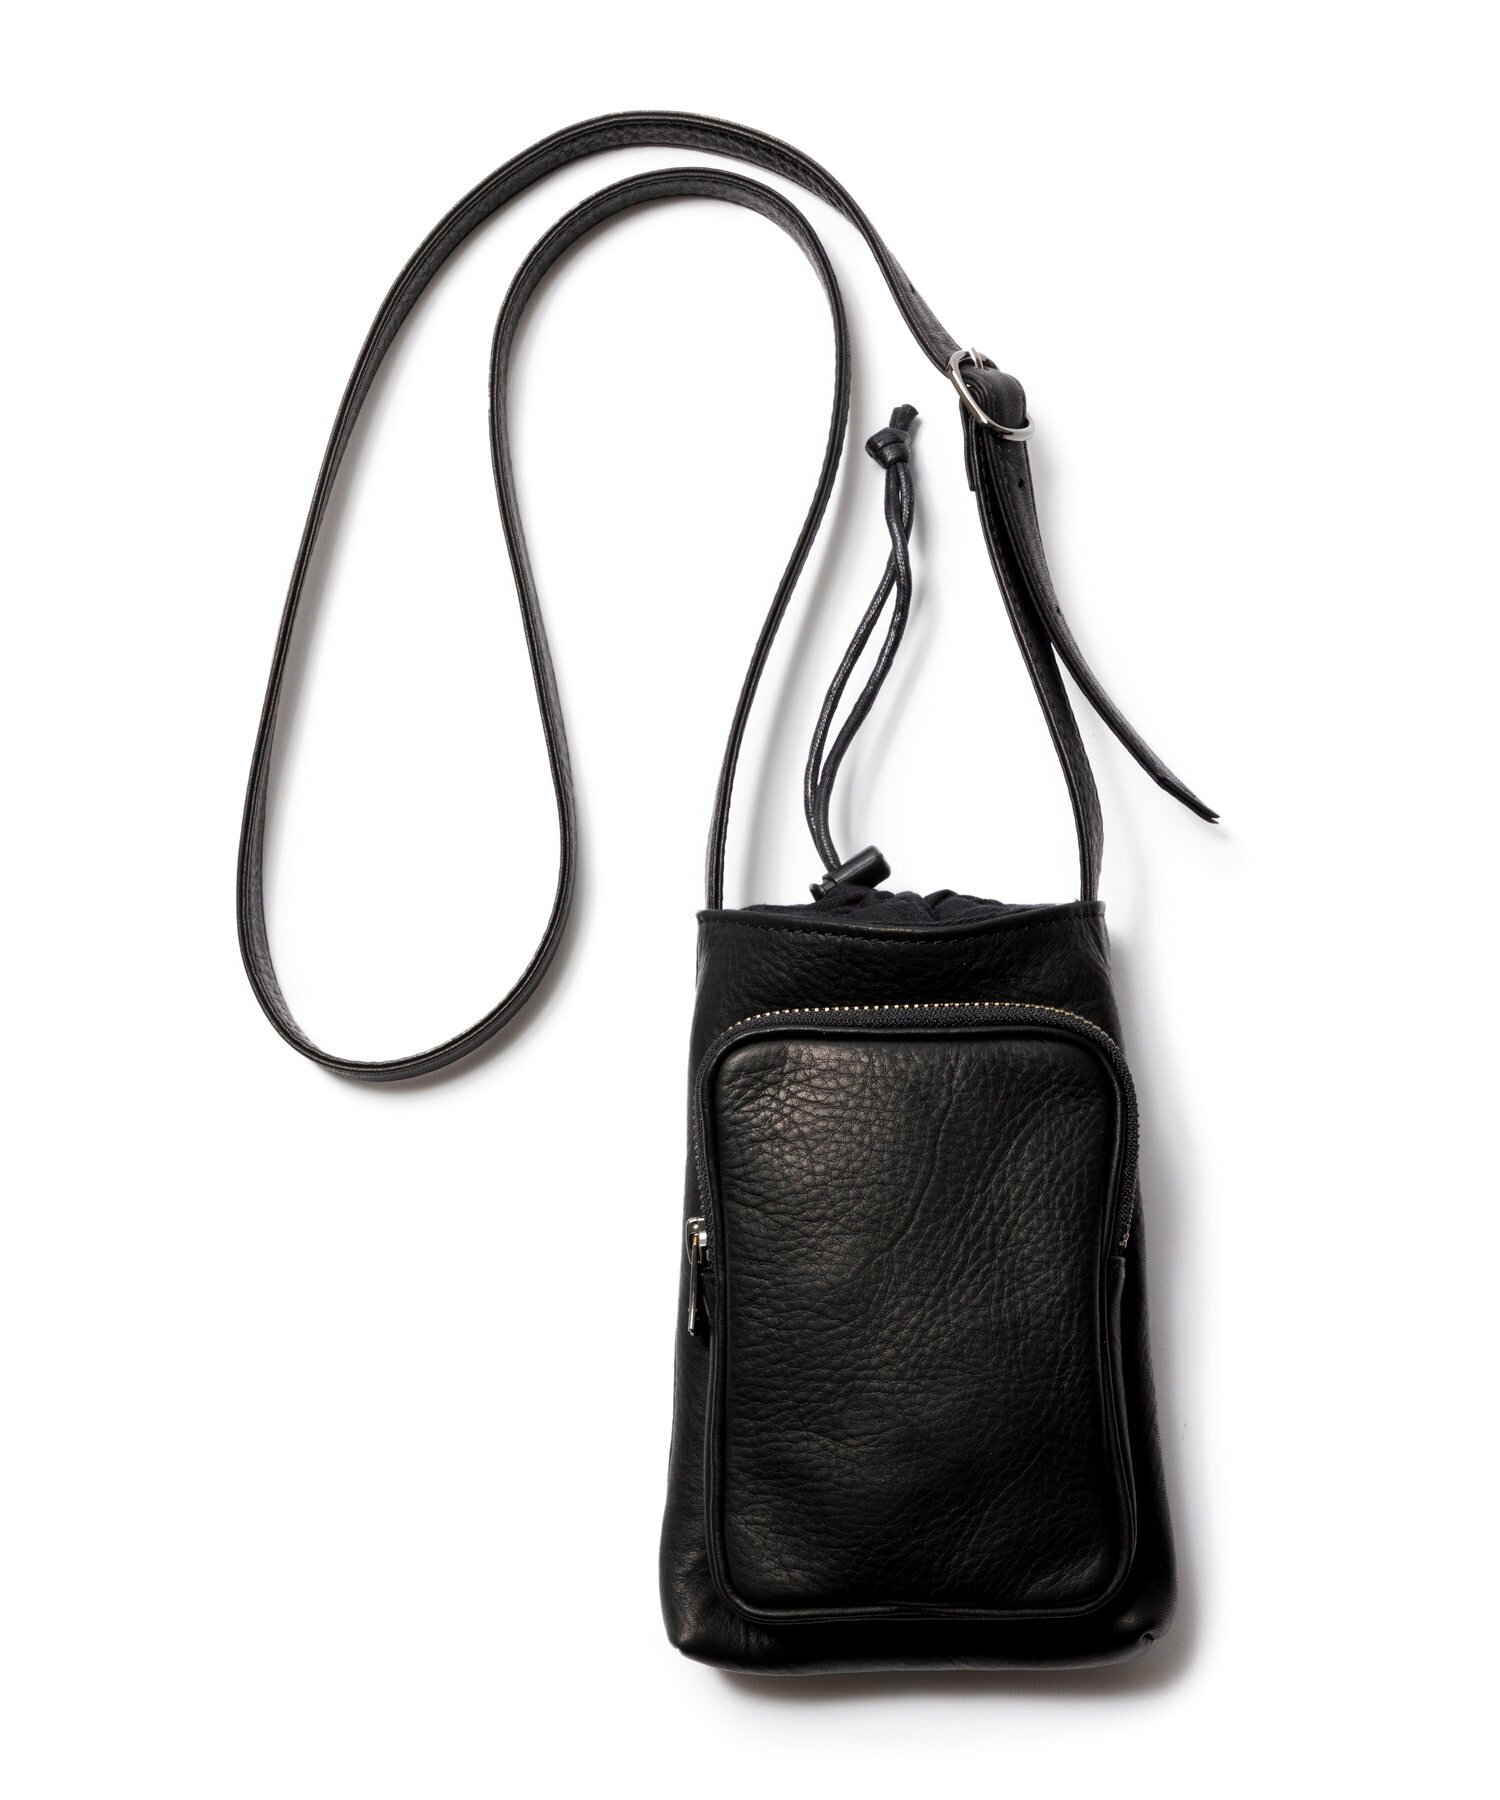 WATER PROOF WASHABLE LEATHER / MOBILE BAG